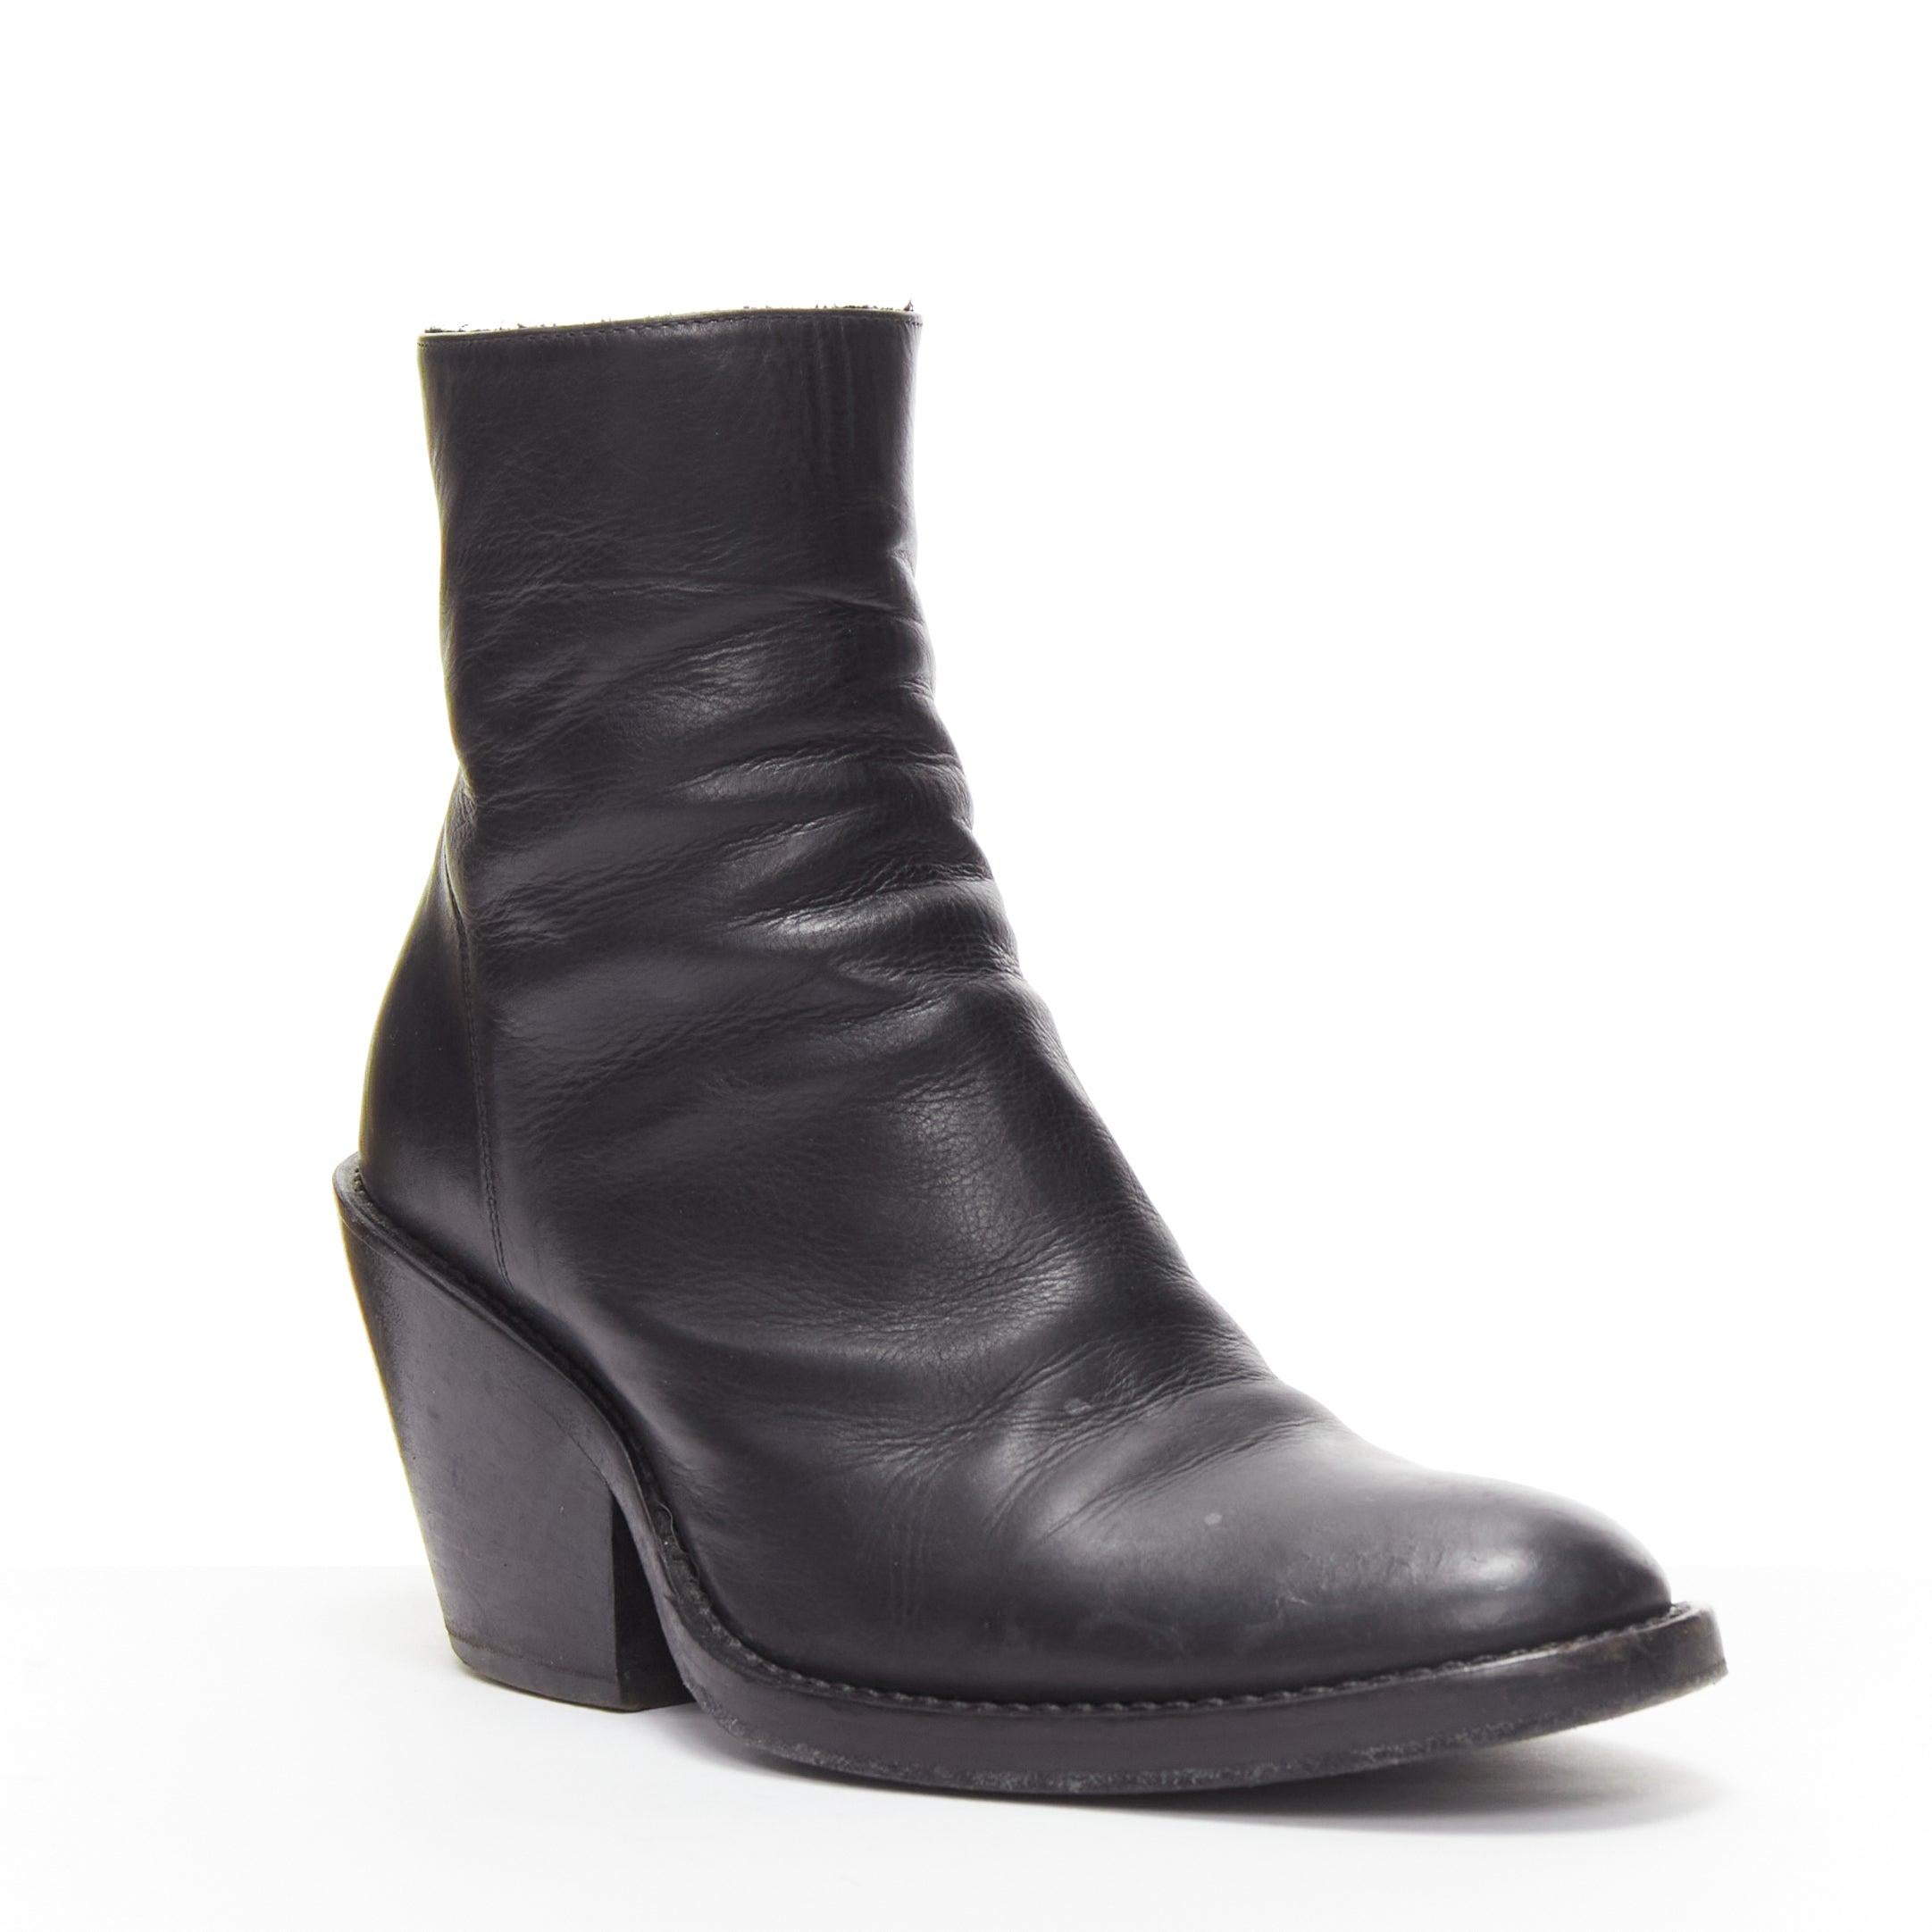 ANN DEMEULEMEESTER black leather round toe cuban wooden heel ankle boot EU36
Reference: JACG/A00093
Brand: Ann Demeulemeester
Material: Leather, Wood
Color: Black
Pattern: Solid
Closure: Zip
Made in: Italy

CONDITION:
Condition: Very good, this item